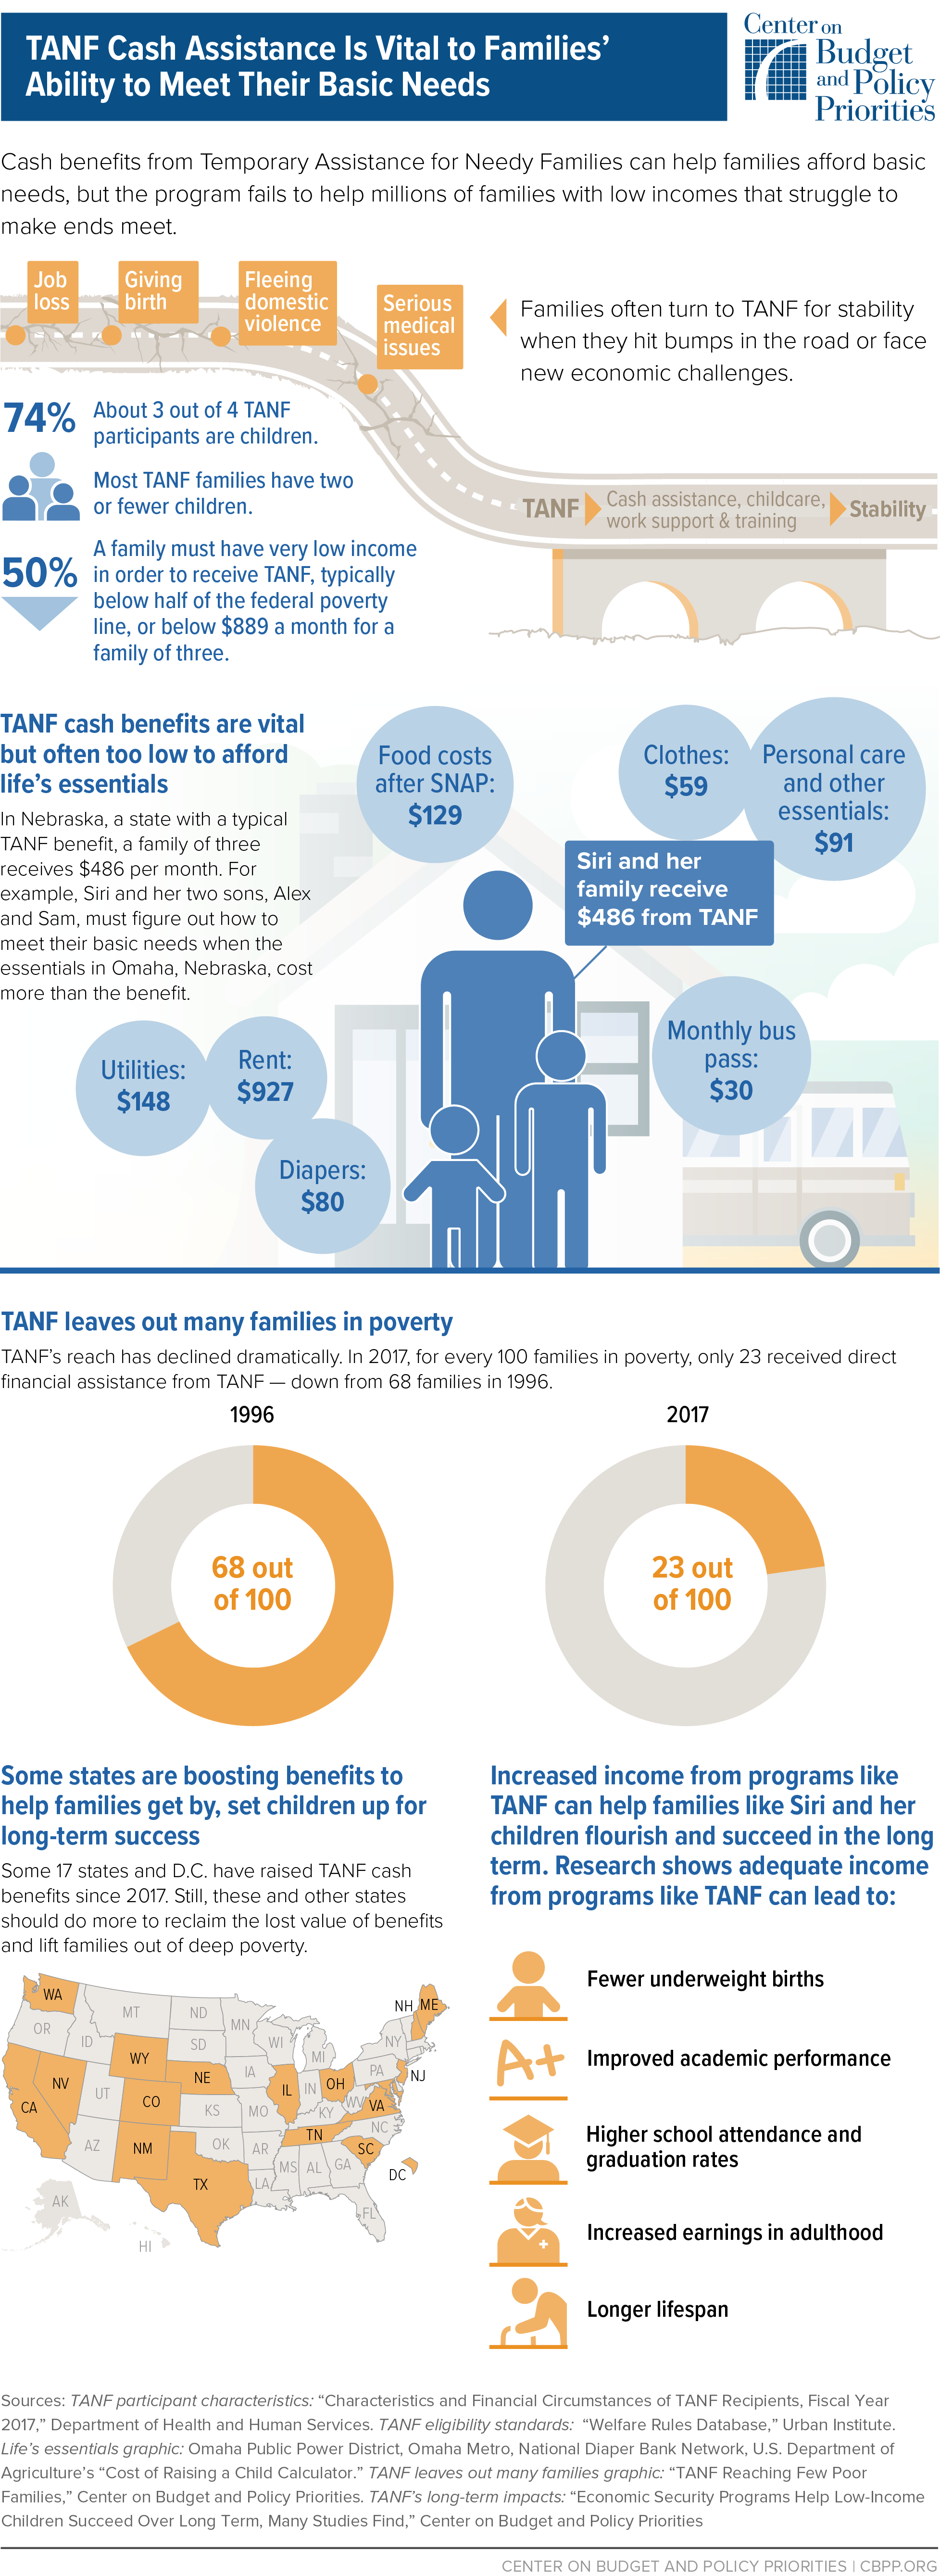 Infographic: TANF Cash Assistance Is Vital to Families’Ability to Meet Their Basic Needs